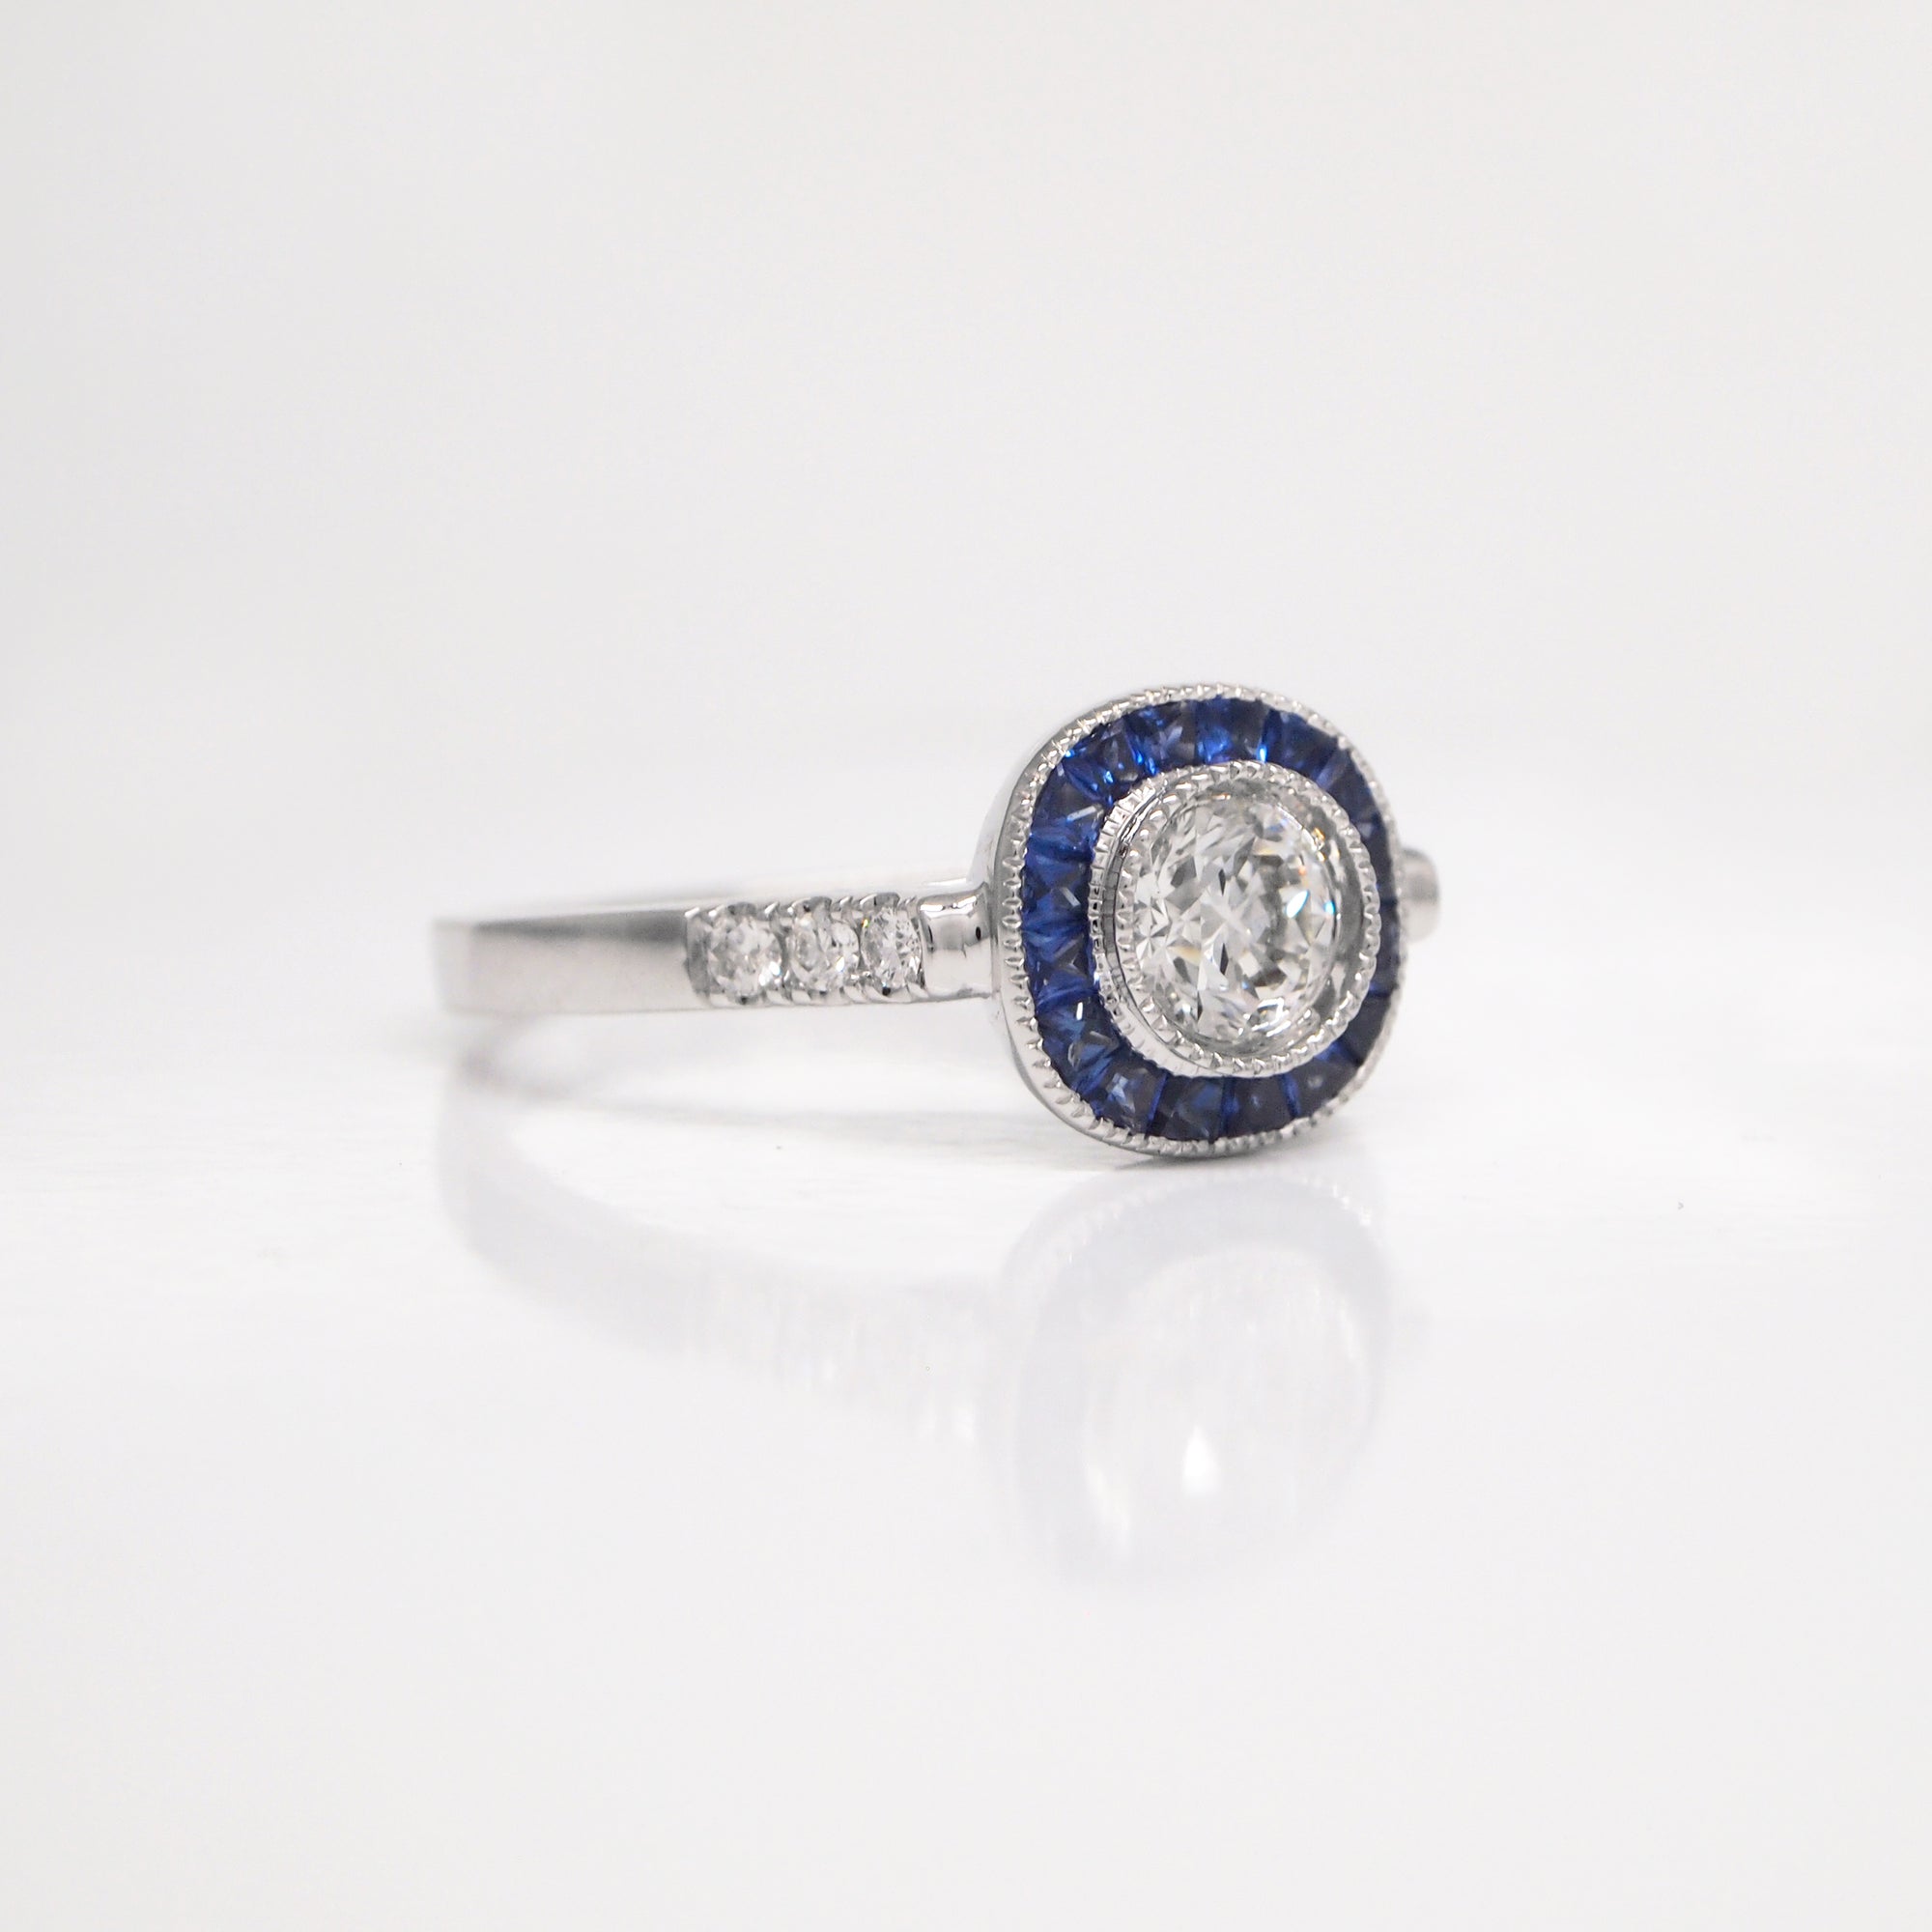 18K white gold sapphire and diamond engagement ring with one 0.42 carat round brilliant-cut diamond, baguette-cut sapphires weighing a total of 0.42 carats, and round brilliant-cut diamond weighing a total of 0.07 carats. 